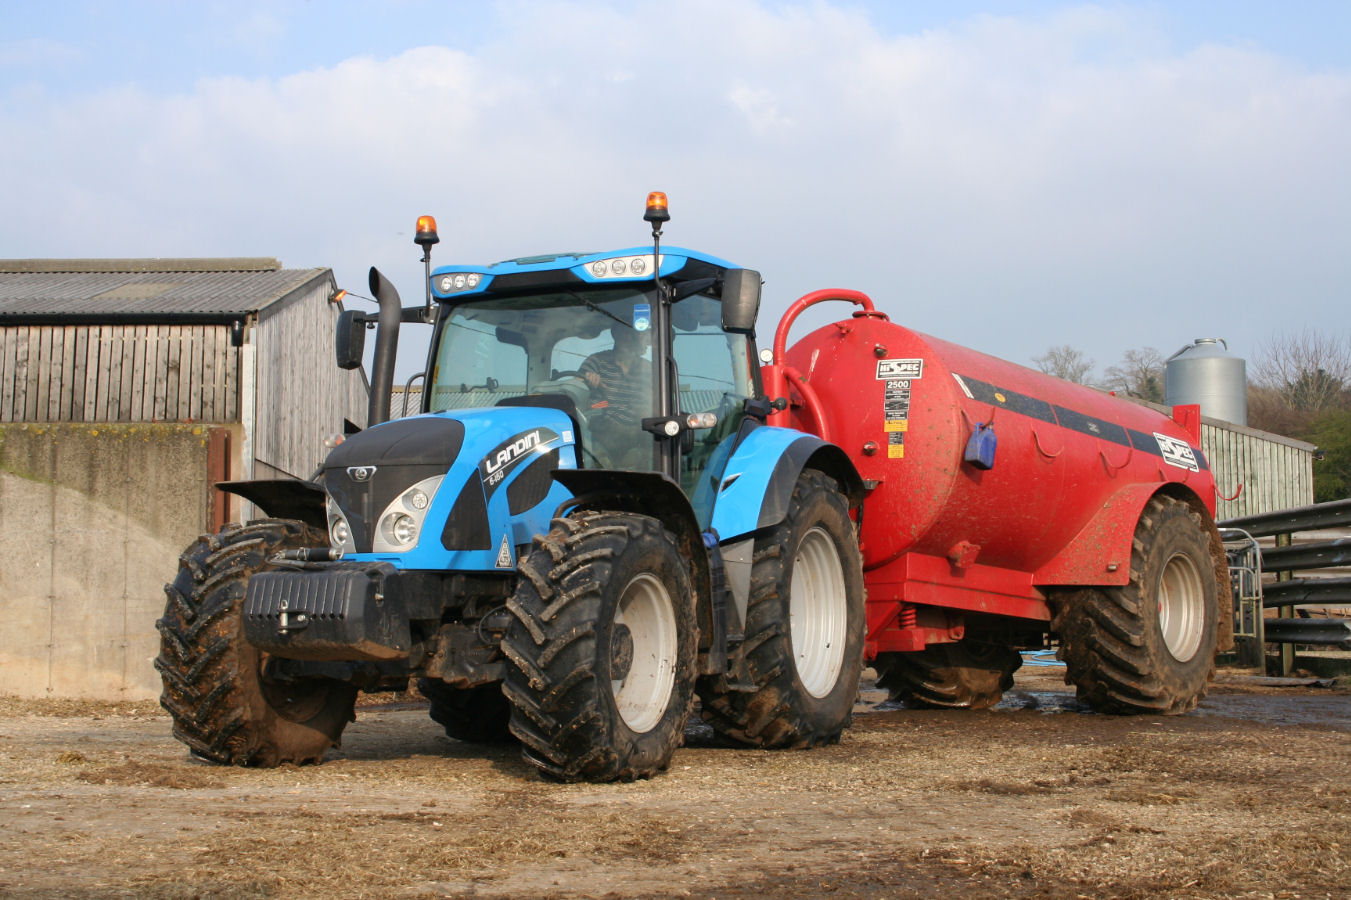 Handling a 2500-gallon slurry tanker is one of the tractor’s main jobs.